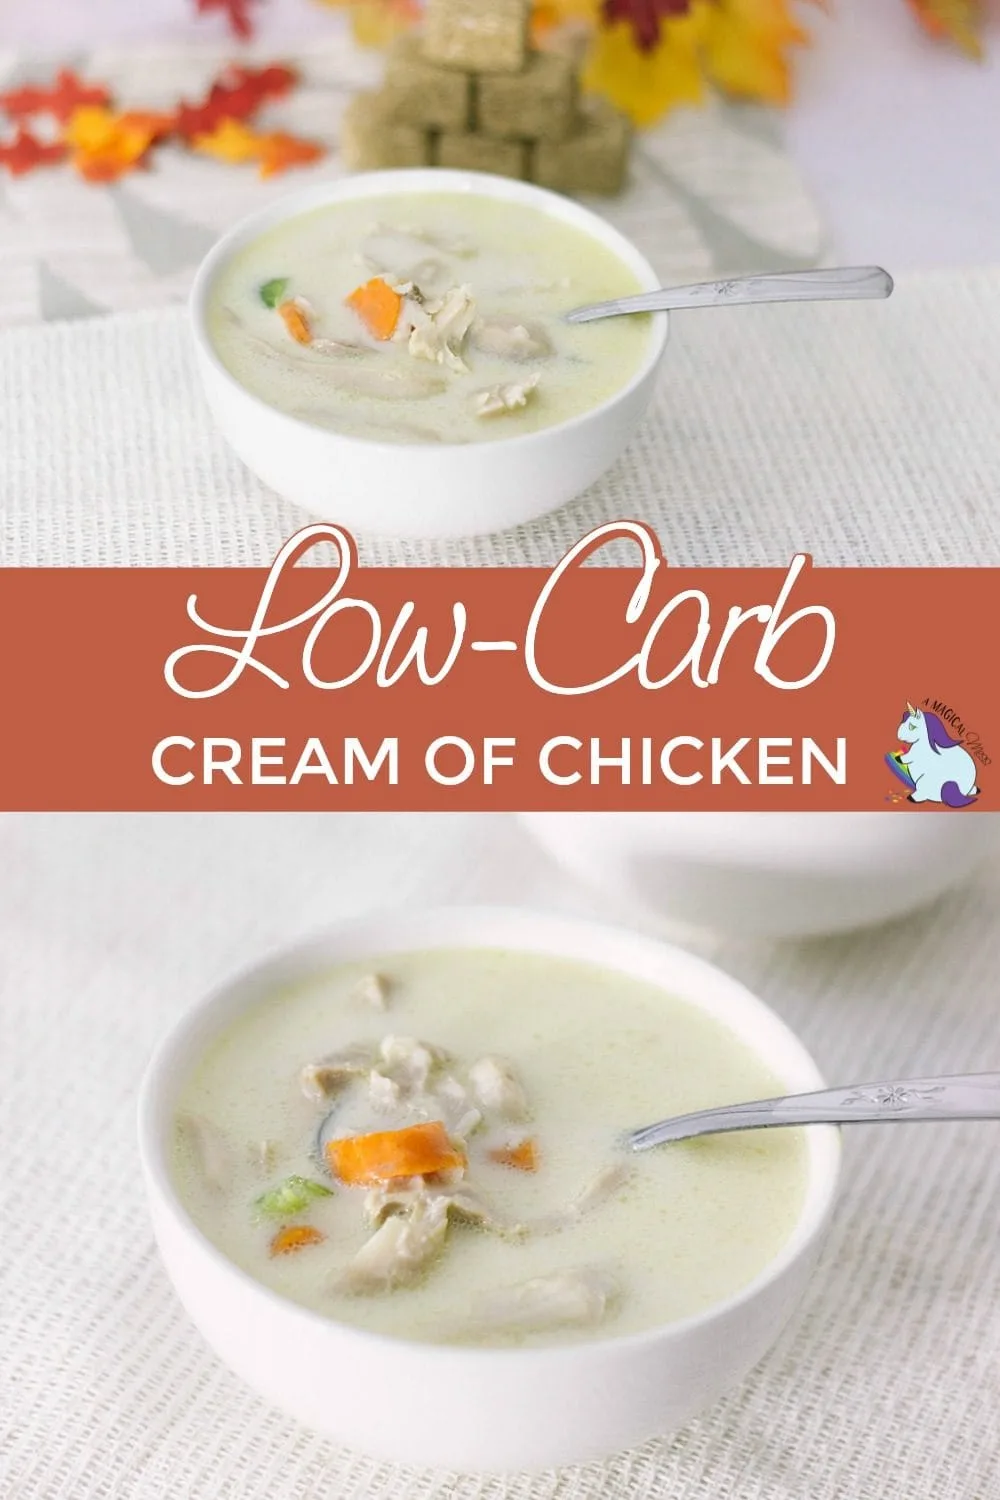 Cream of chicken soup with carrots in a bowl.